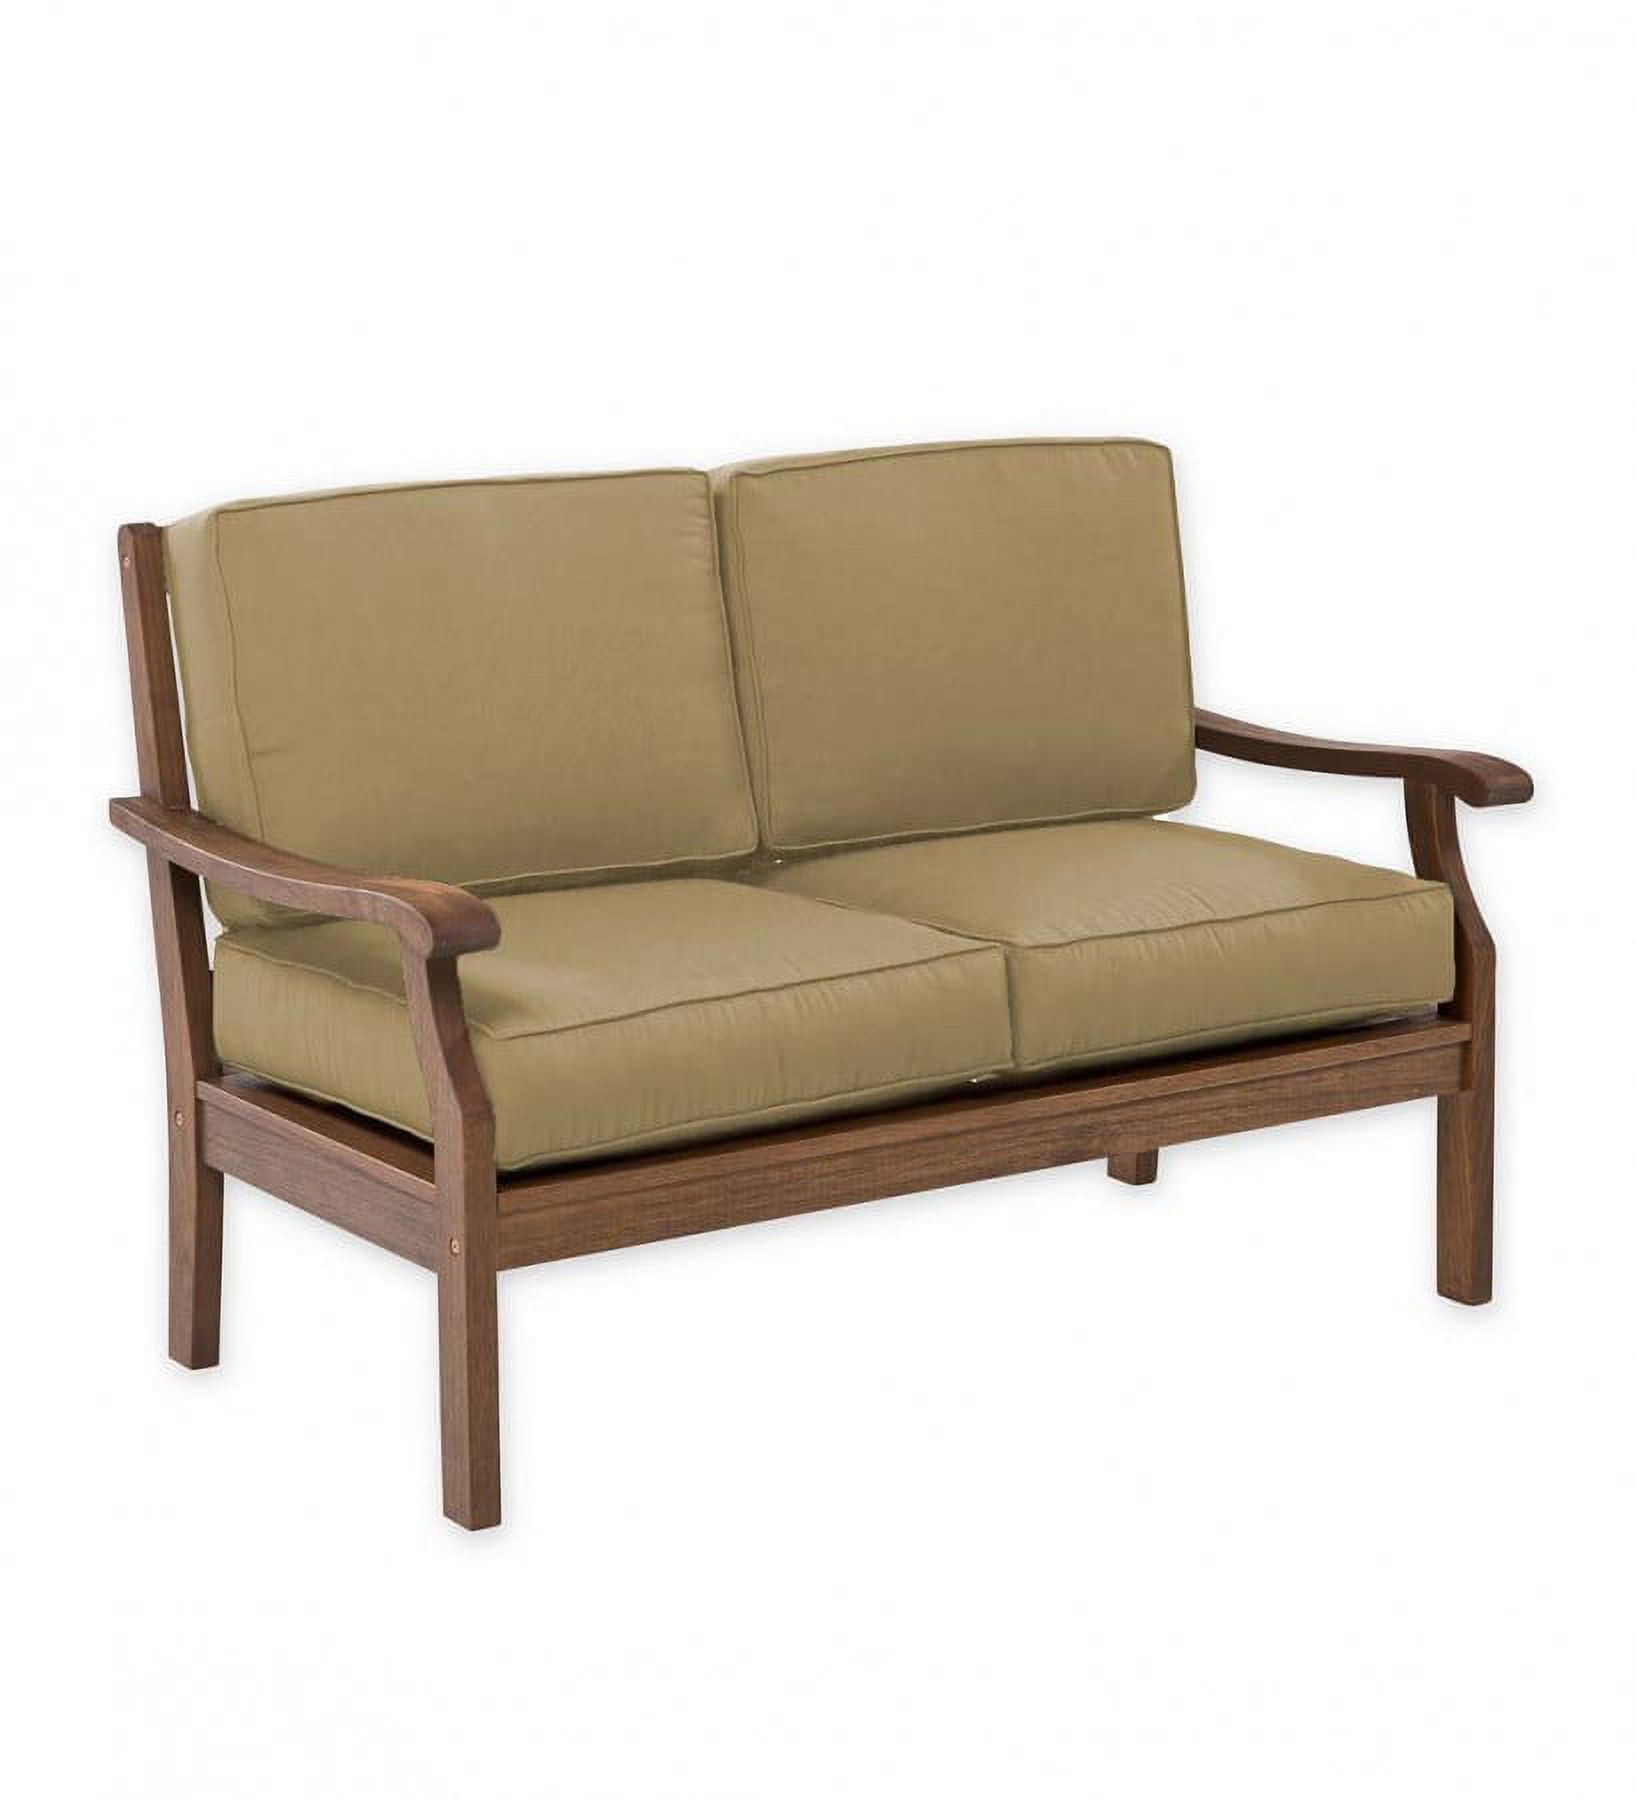 Claremont Deep Seating Love Seat with Cushions - image 2 of 2